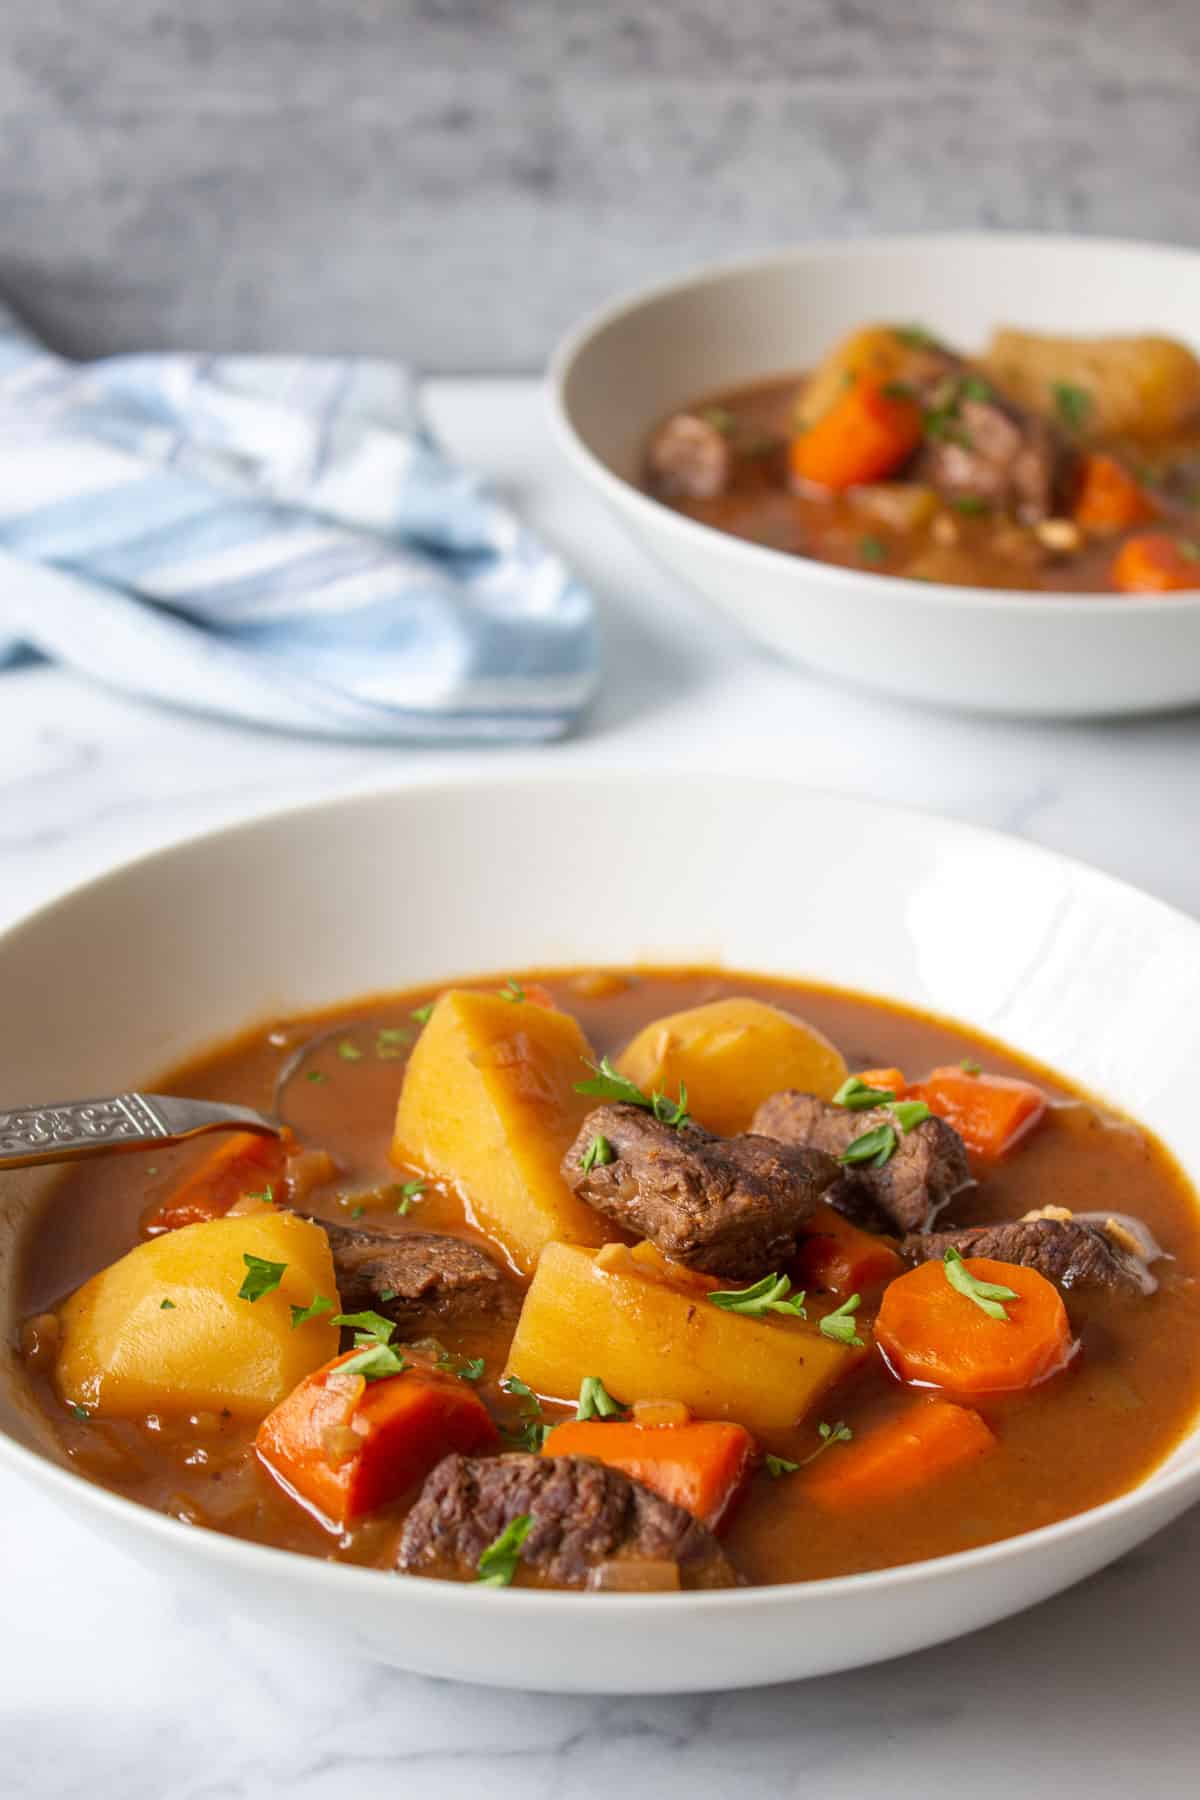 A bowl of stew with carrots and potatoes.